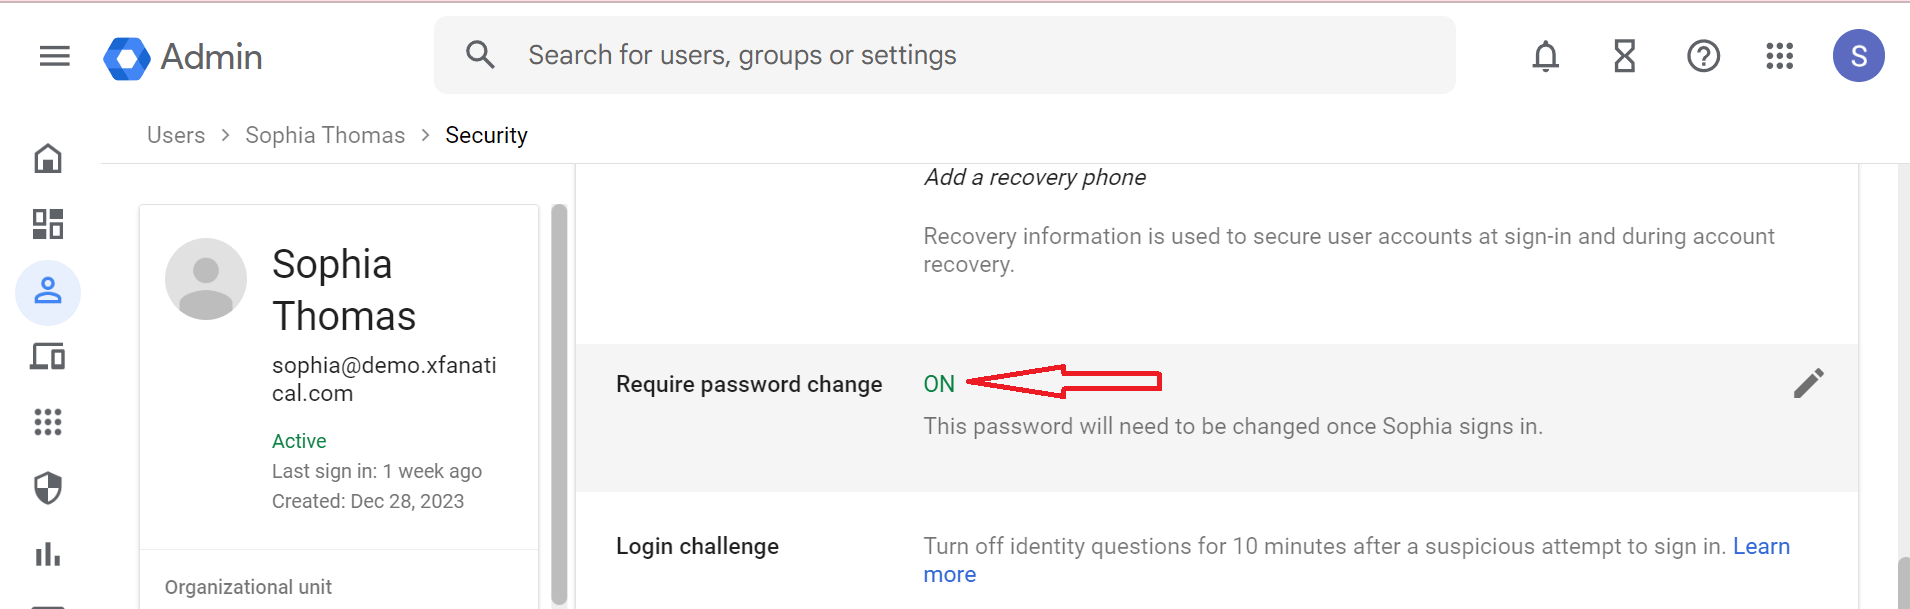 You'll notice the Required password change option